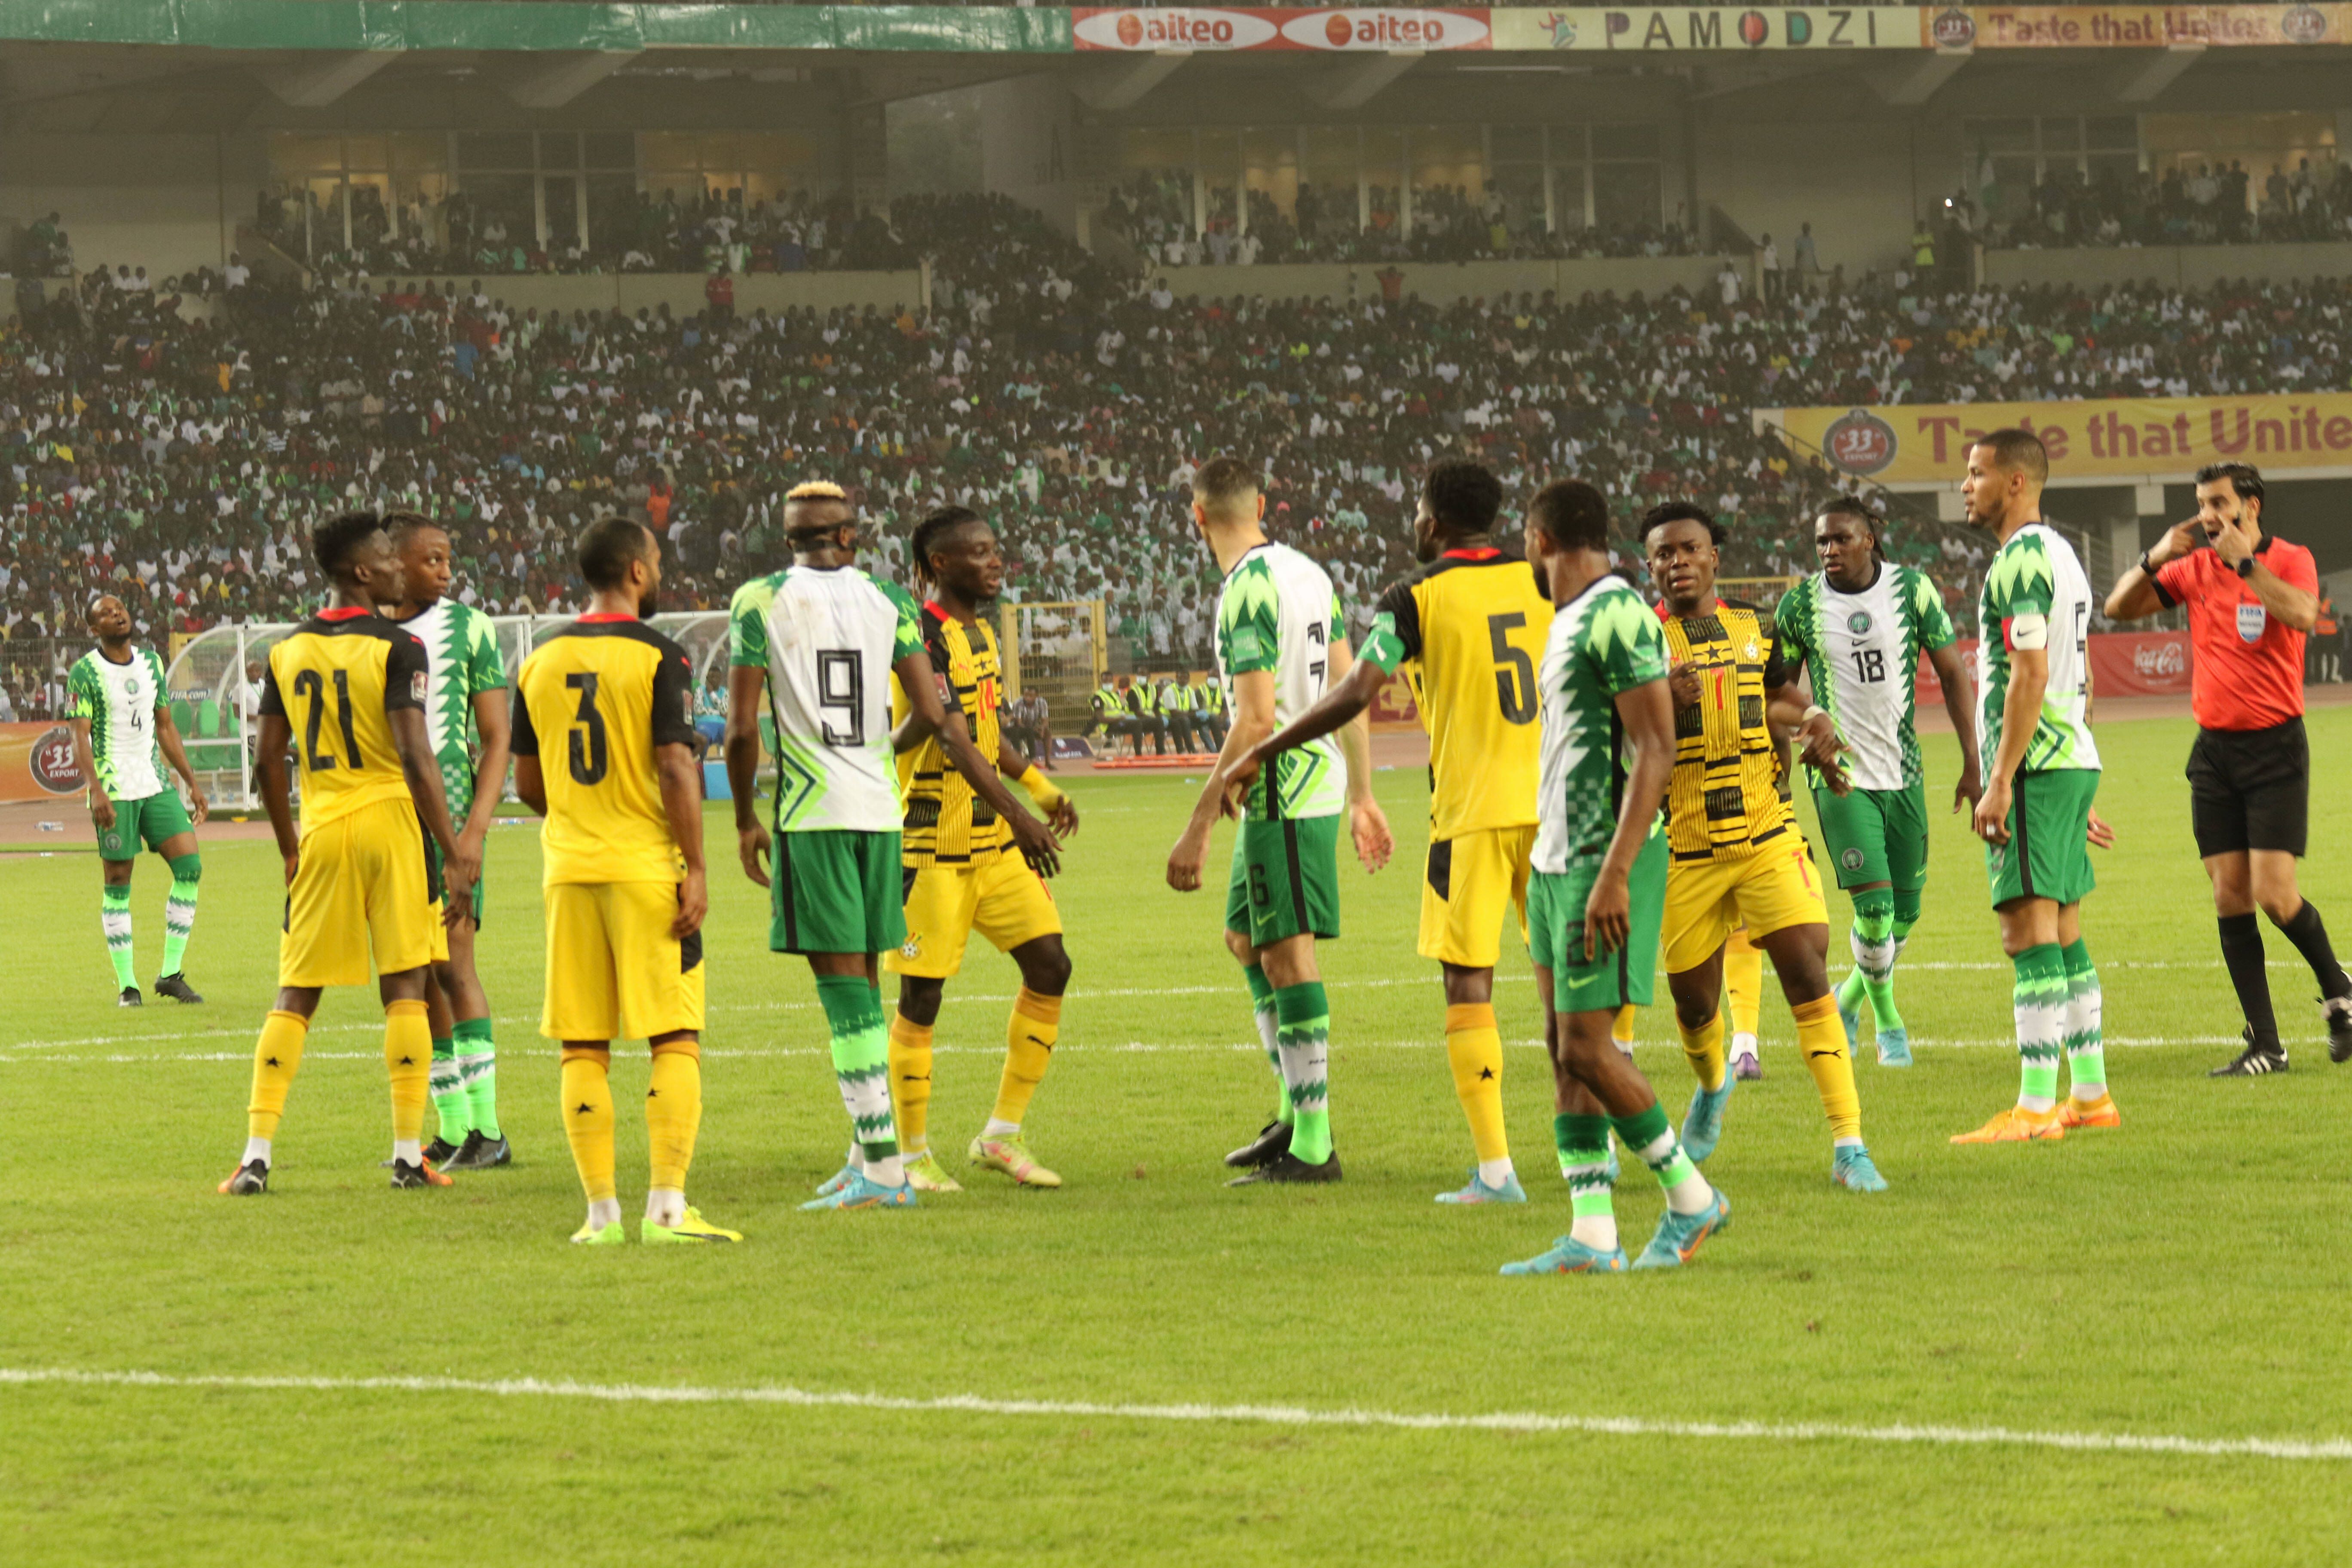 Nigeria failed to secure World Cup qualification in Abuja after playing a 1-1 draw against Ghana